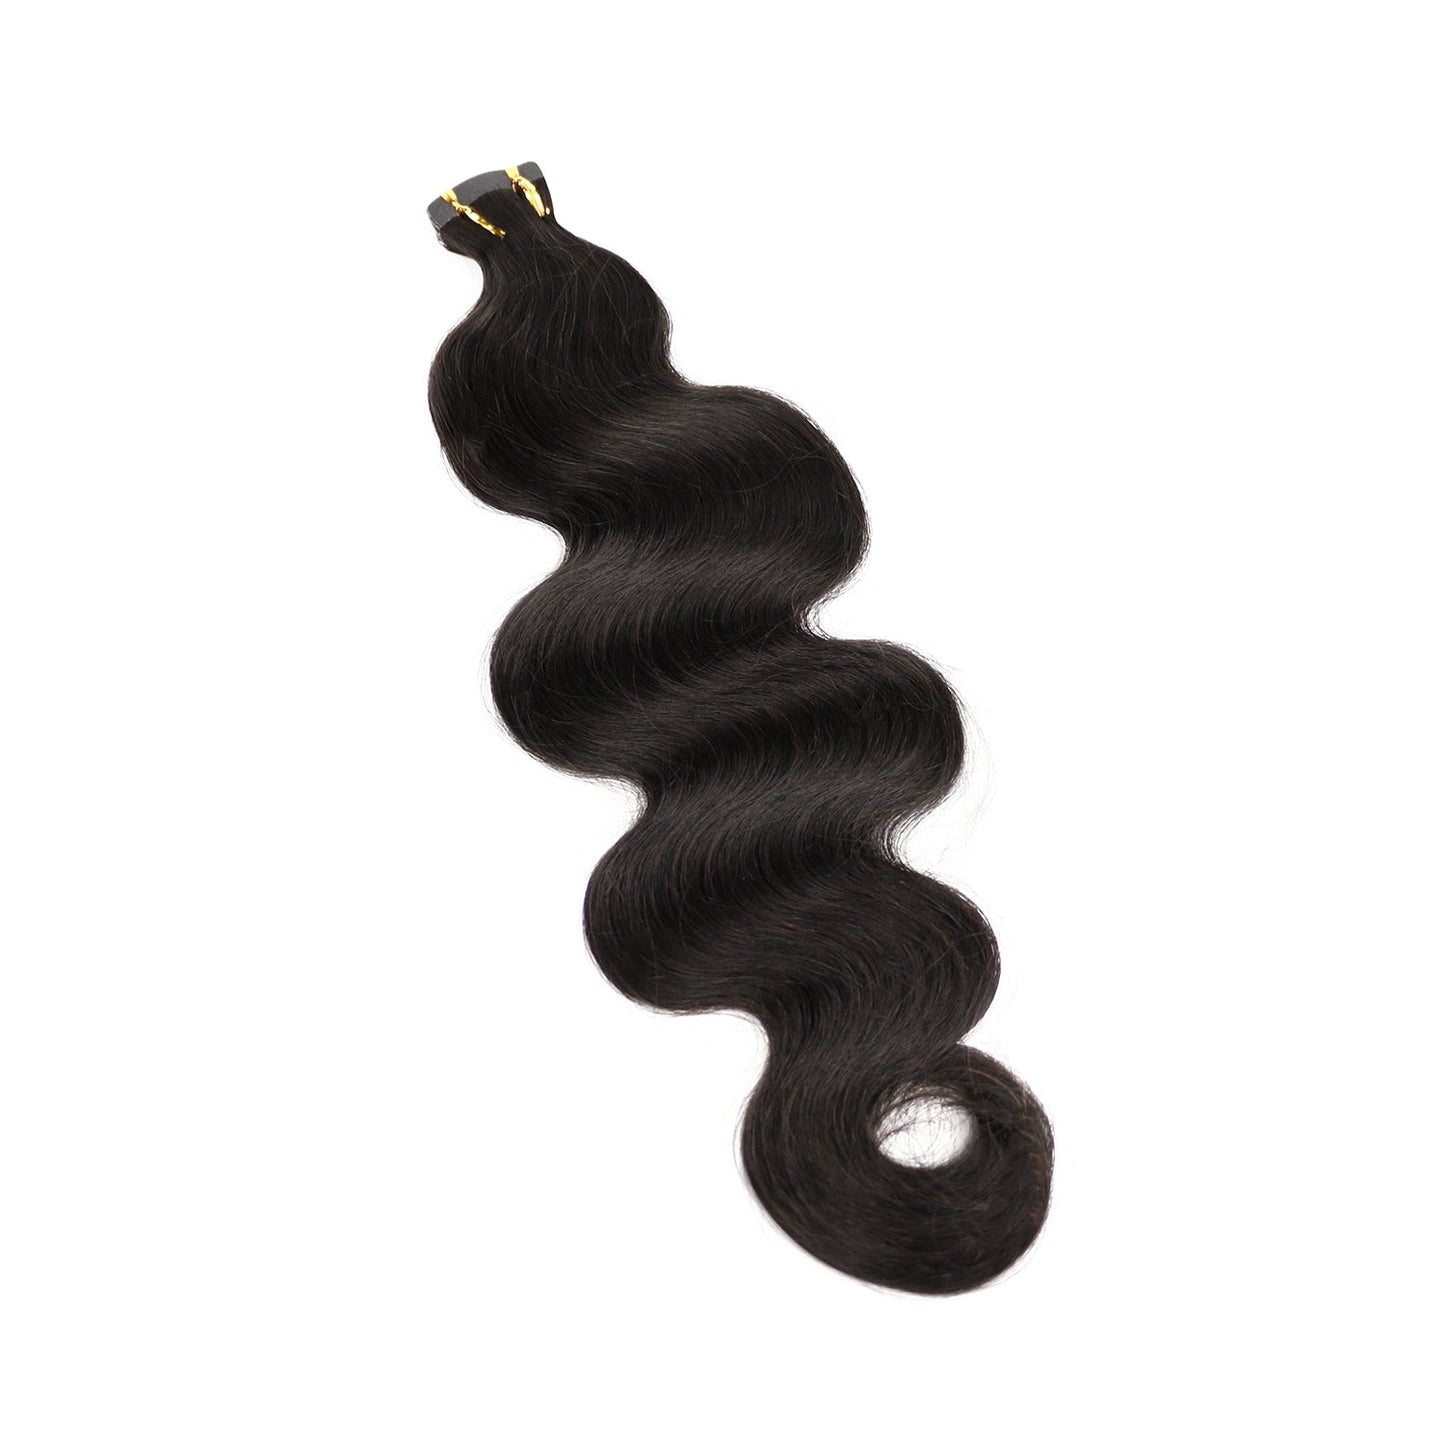 Nature Virgin Human Hair Body Wave Tape In Hair Extension